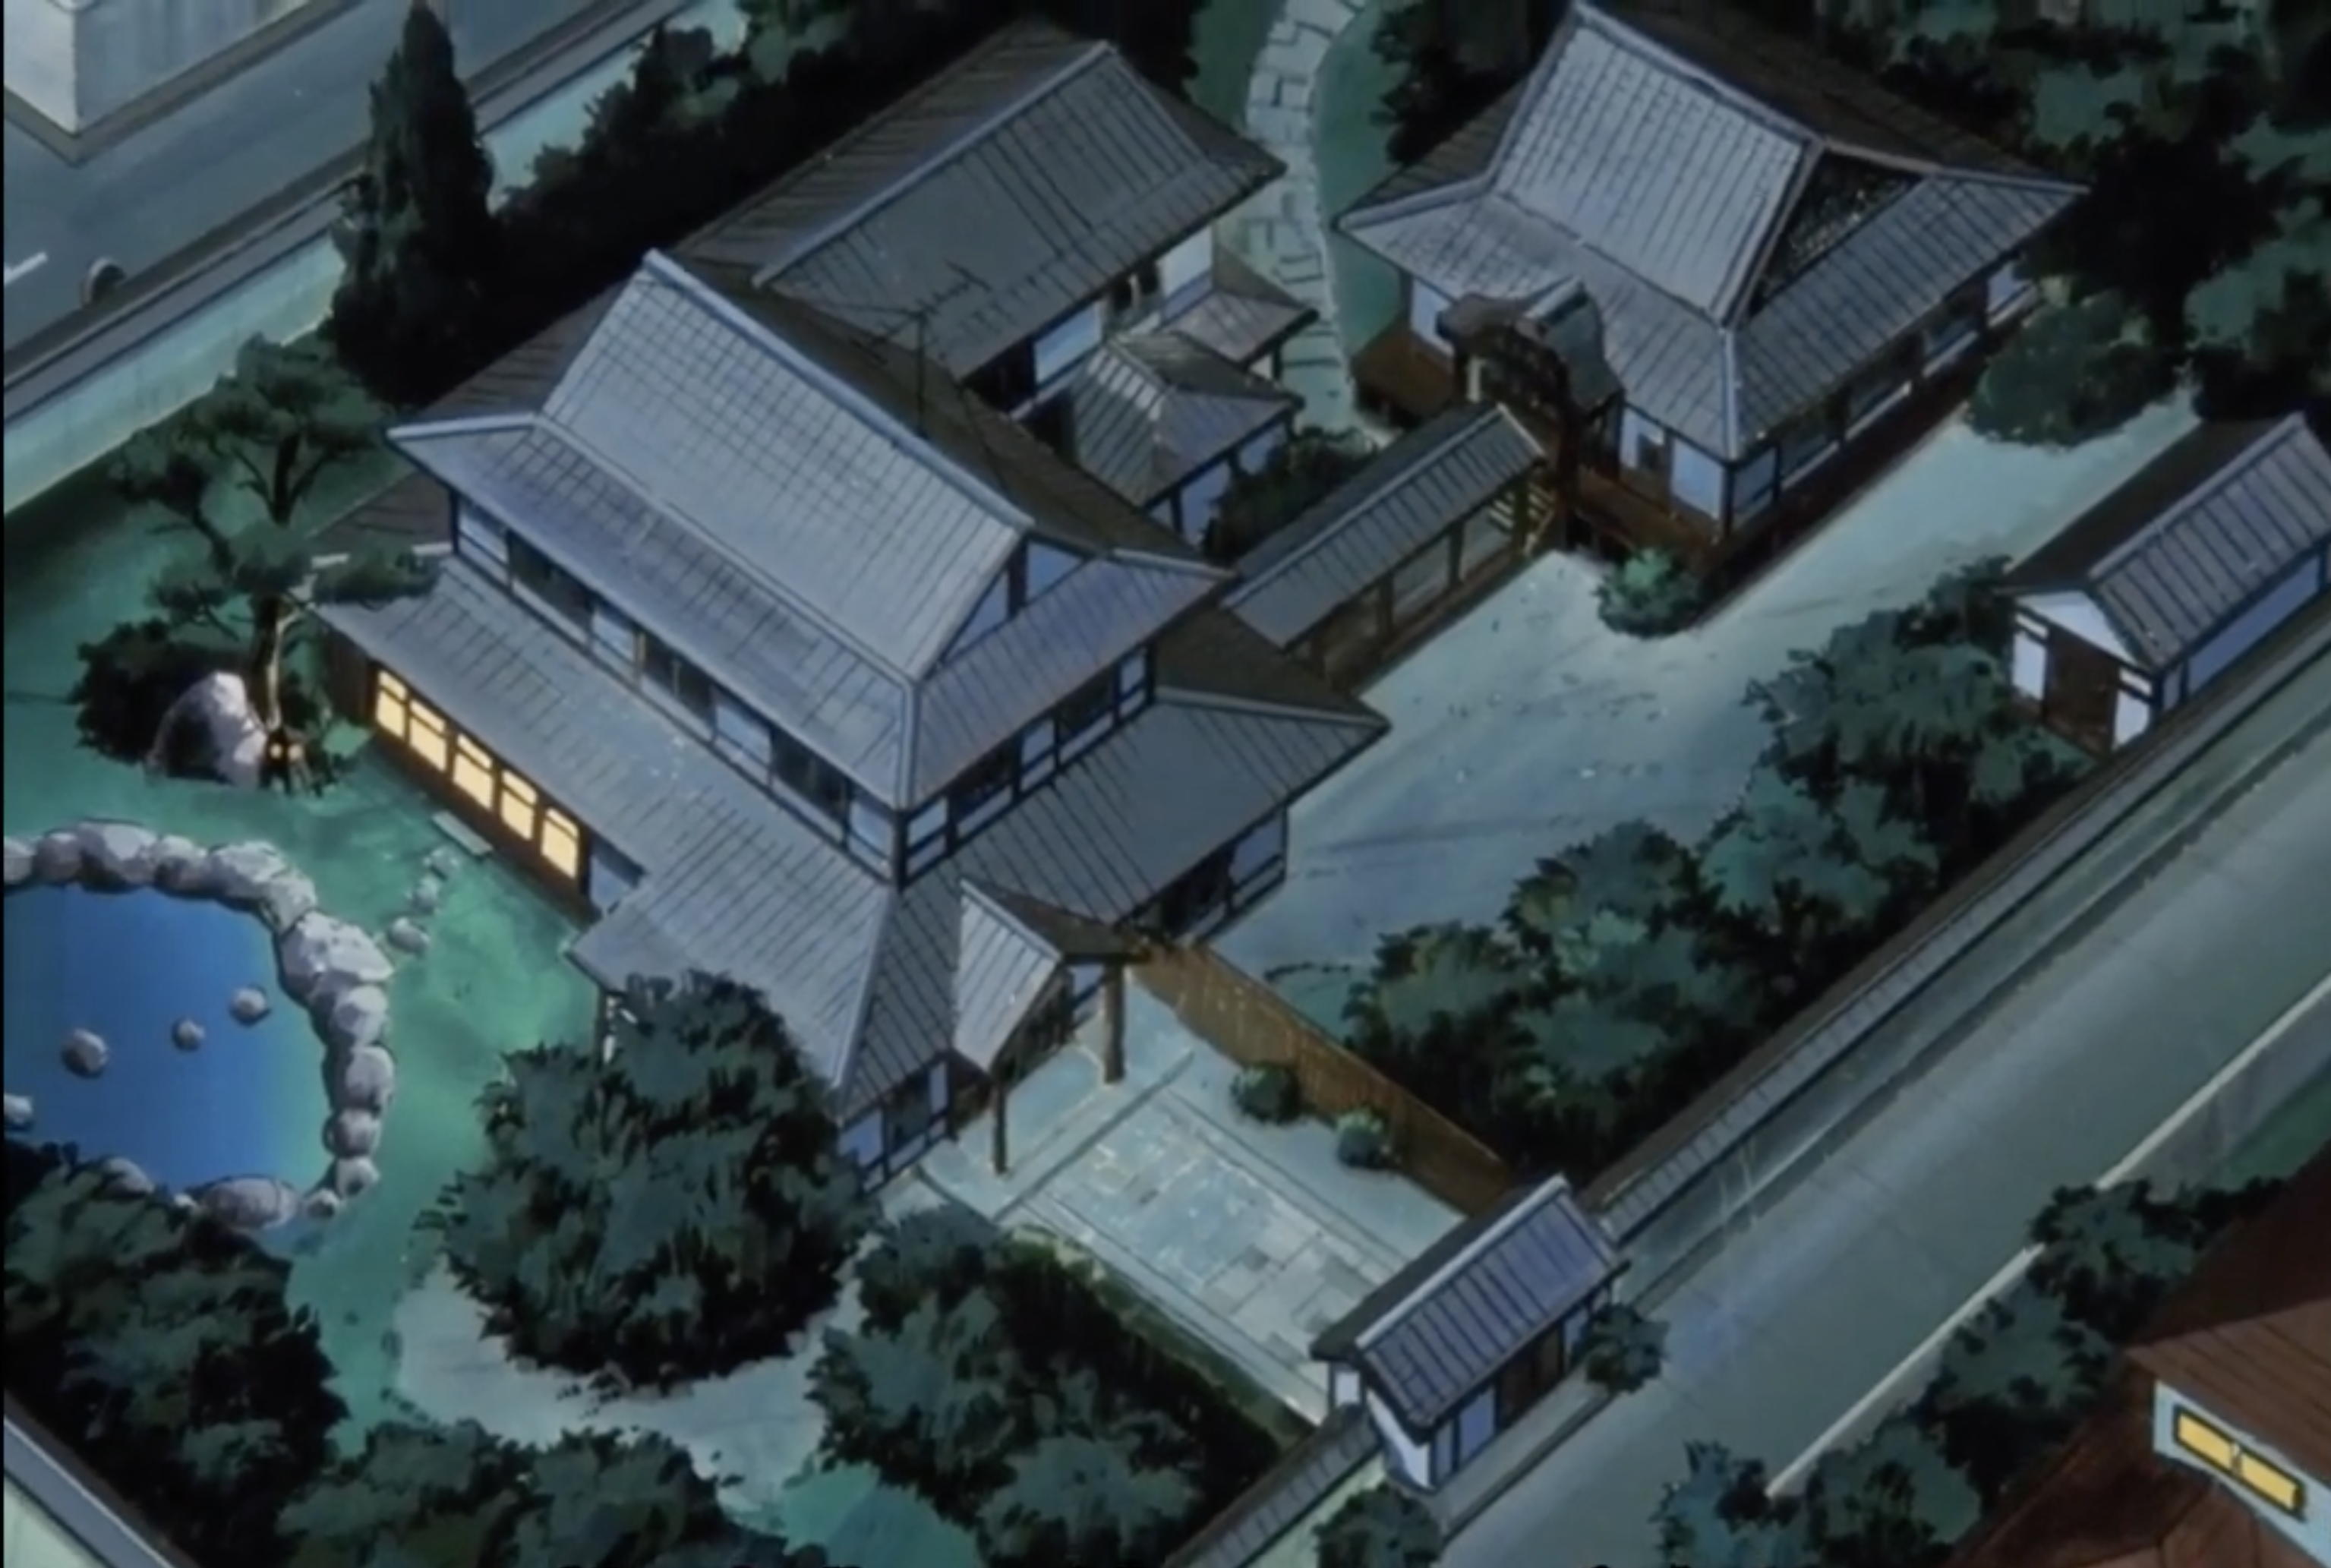 The Dendo Residence & Dojo seen from above at night time